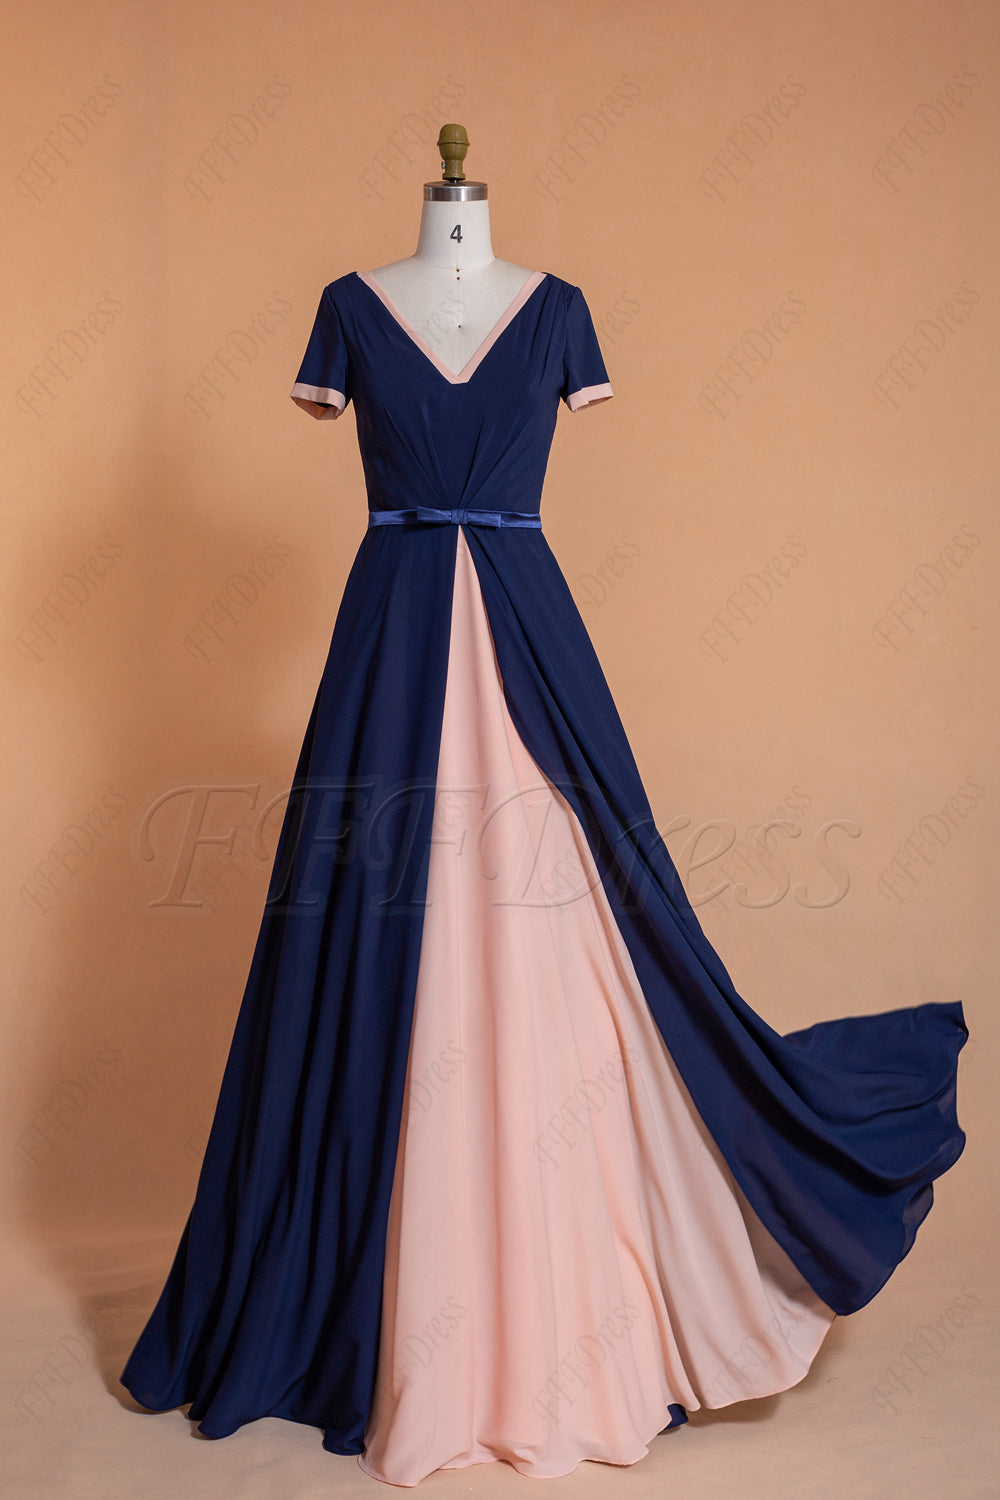 Navy & Blush Modest Bridesmaid Dresses with Short Sleeves